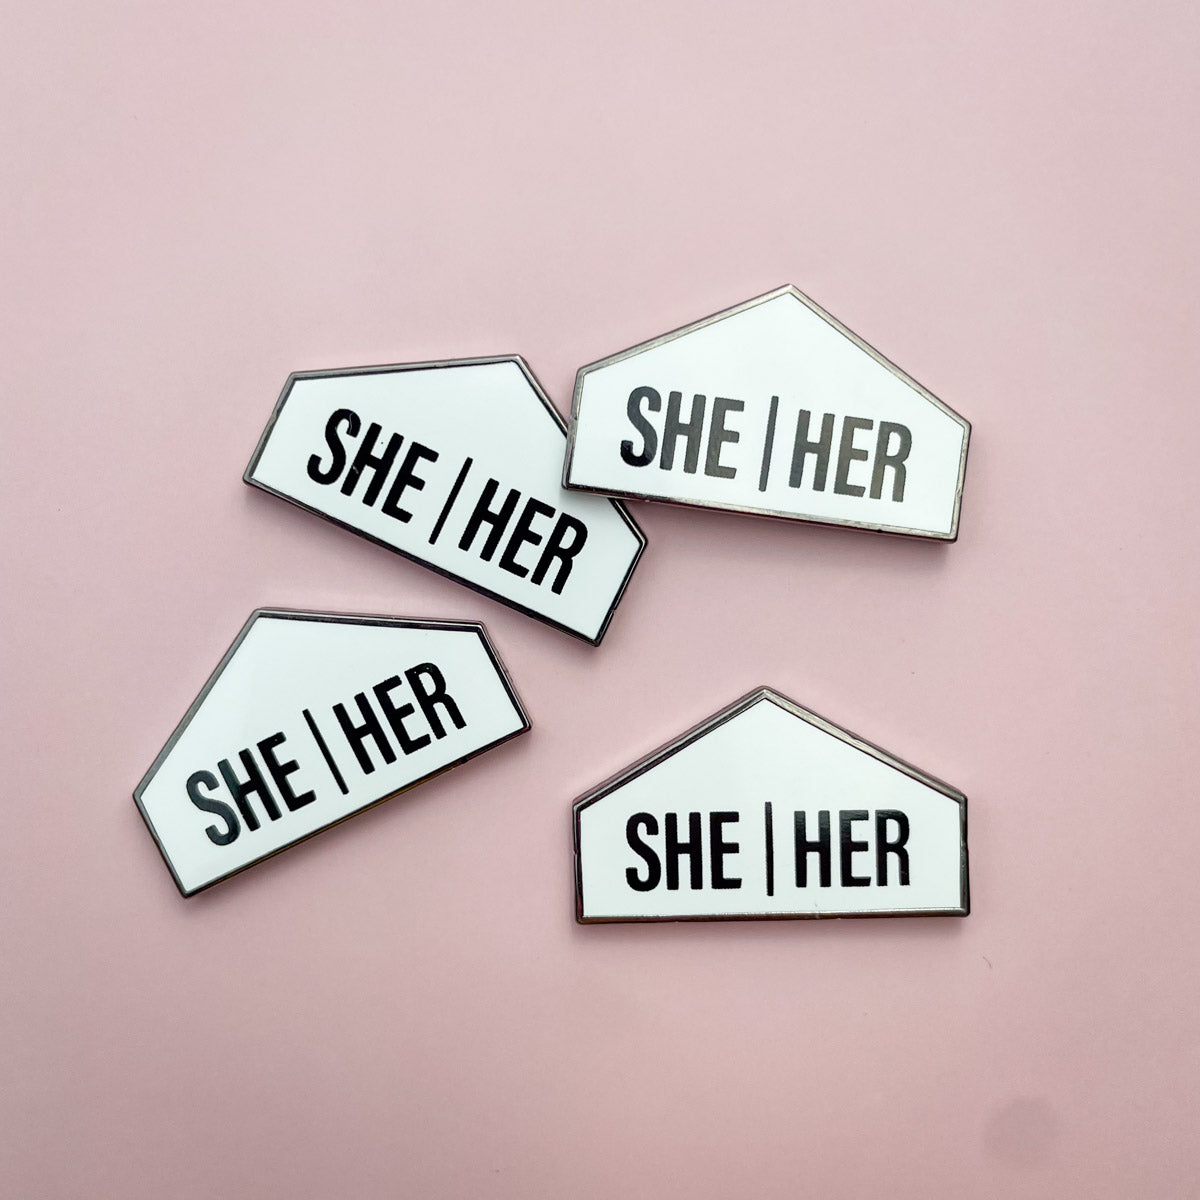 Pronoun + Pride Flag Interchangeable Magnetic Pin Set by Flags For Good | She Her Pronoun Badges Tops